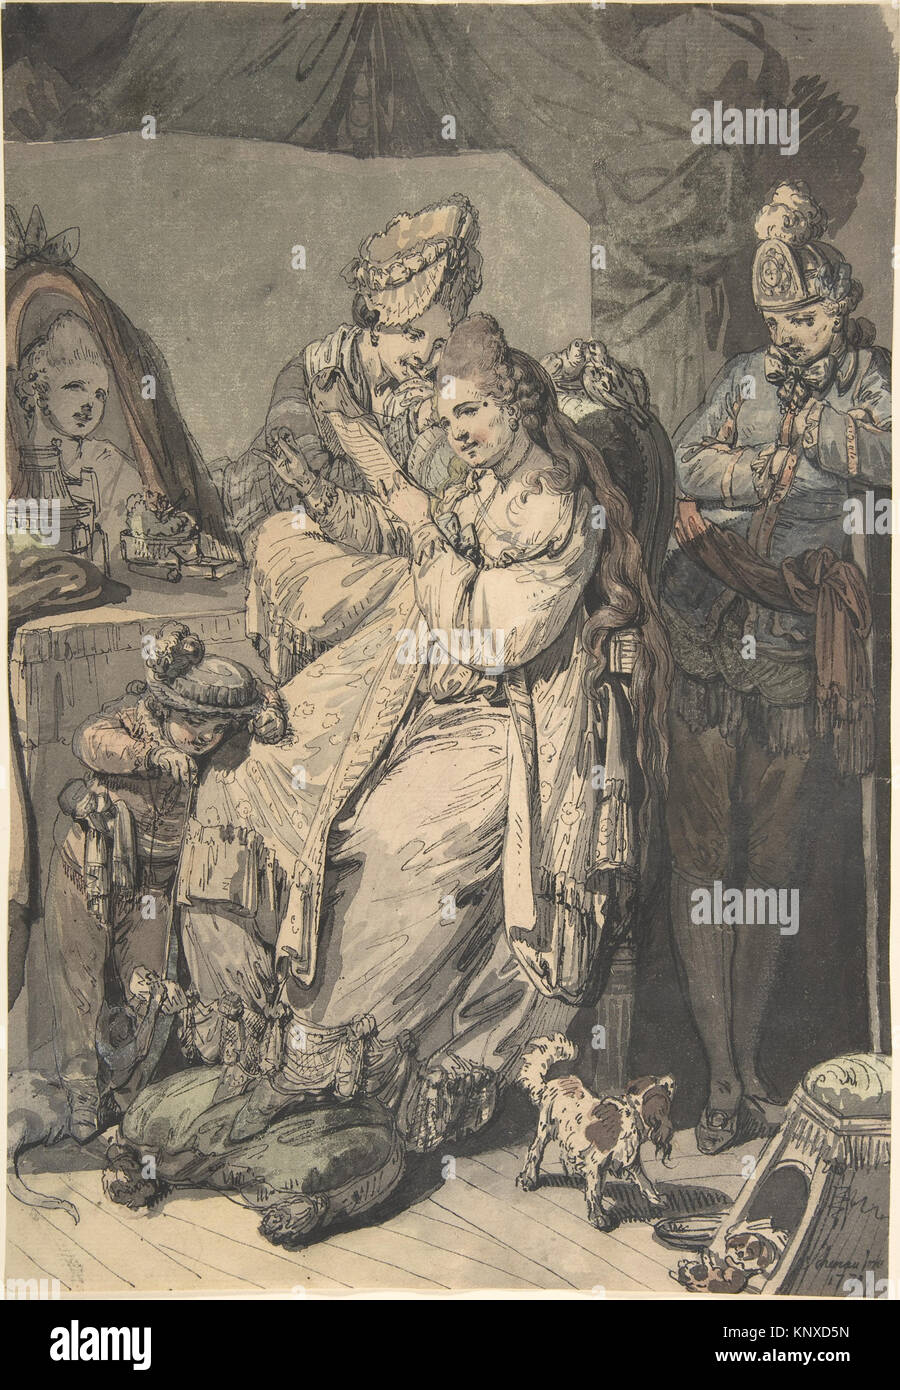 A Woman at her Toilet with a Maid, a Boy, a Dog and a Young Soldier; verso- A Sketch for a Similar Composition MET DP803997 383935 Artist: Johann Eleazar Zeissig, called Schenau, German, Grosssch?nau (Gross-Sch?nau) 1737?1806 Dresden, A Woman at her Toilet with a Maid, a Boy, a Dog and a Young Soldier; verso: A Sketch for a Similar Composition, 1770, Pen and black ink, grey wash, watercolour, over a sketch in black chalk or graphite, sheet: 13 7/16 x 9 3/16 in. (34.1 x 23.4 cm). The Metropolitan Museum of Art, New York. Purchase, Guy Wildenstein Gift and Mary Oenslager Fund, 2008 (2008.506) Stock Photo